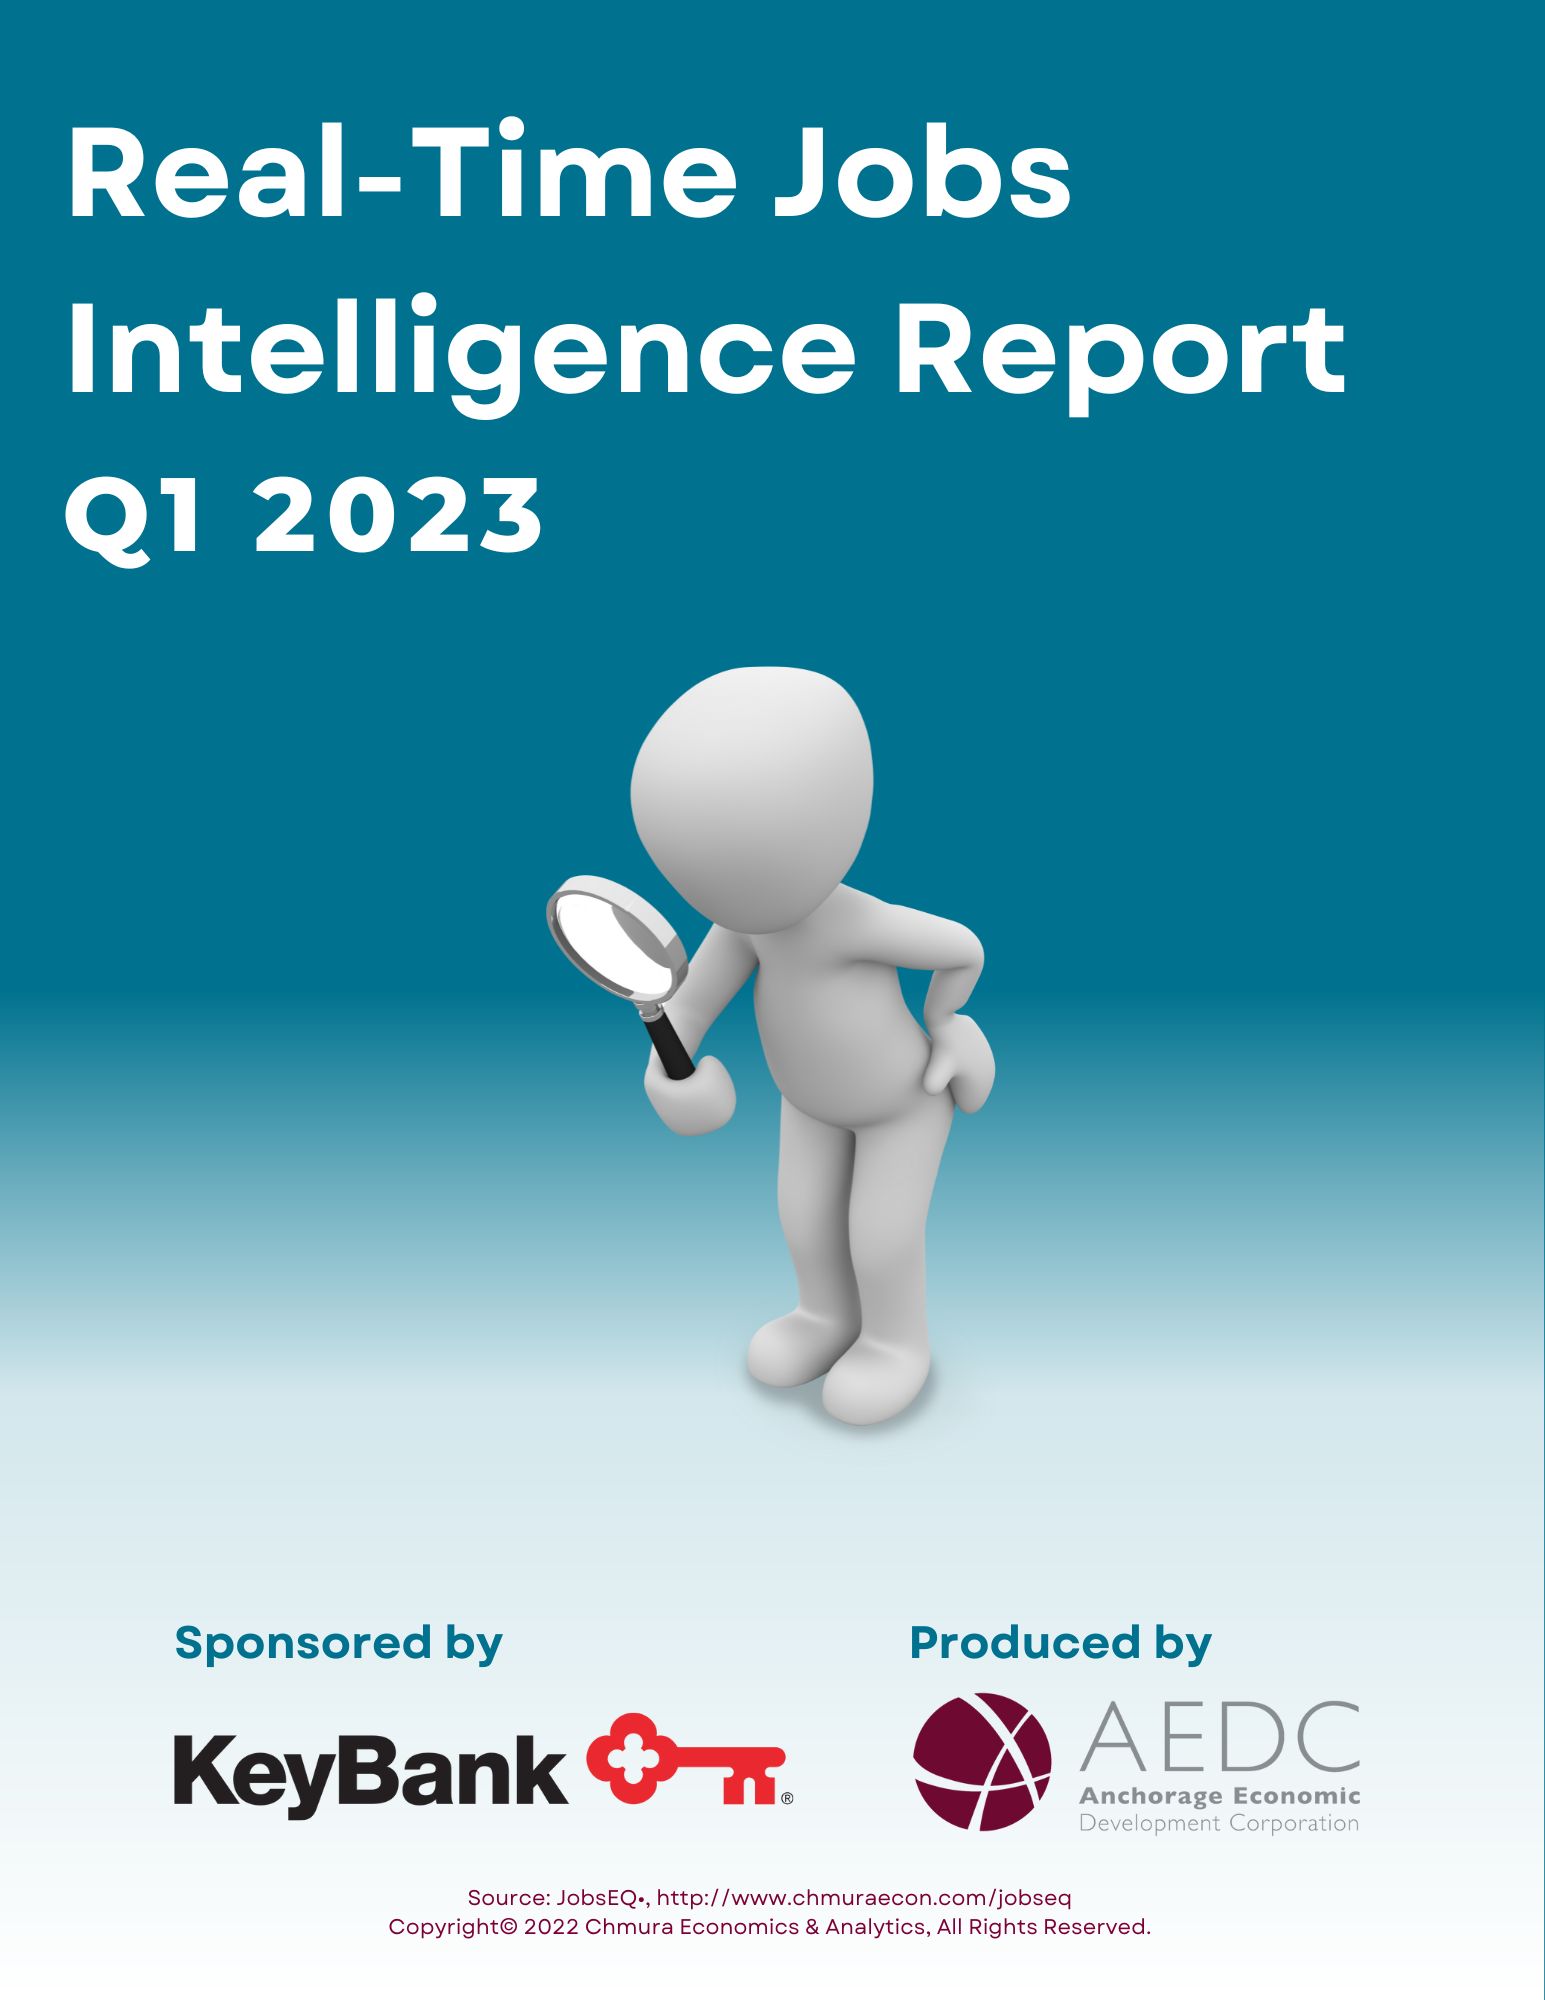 Real-Time Jobs Intelligence Report 2023, Q1